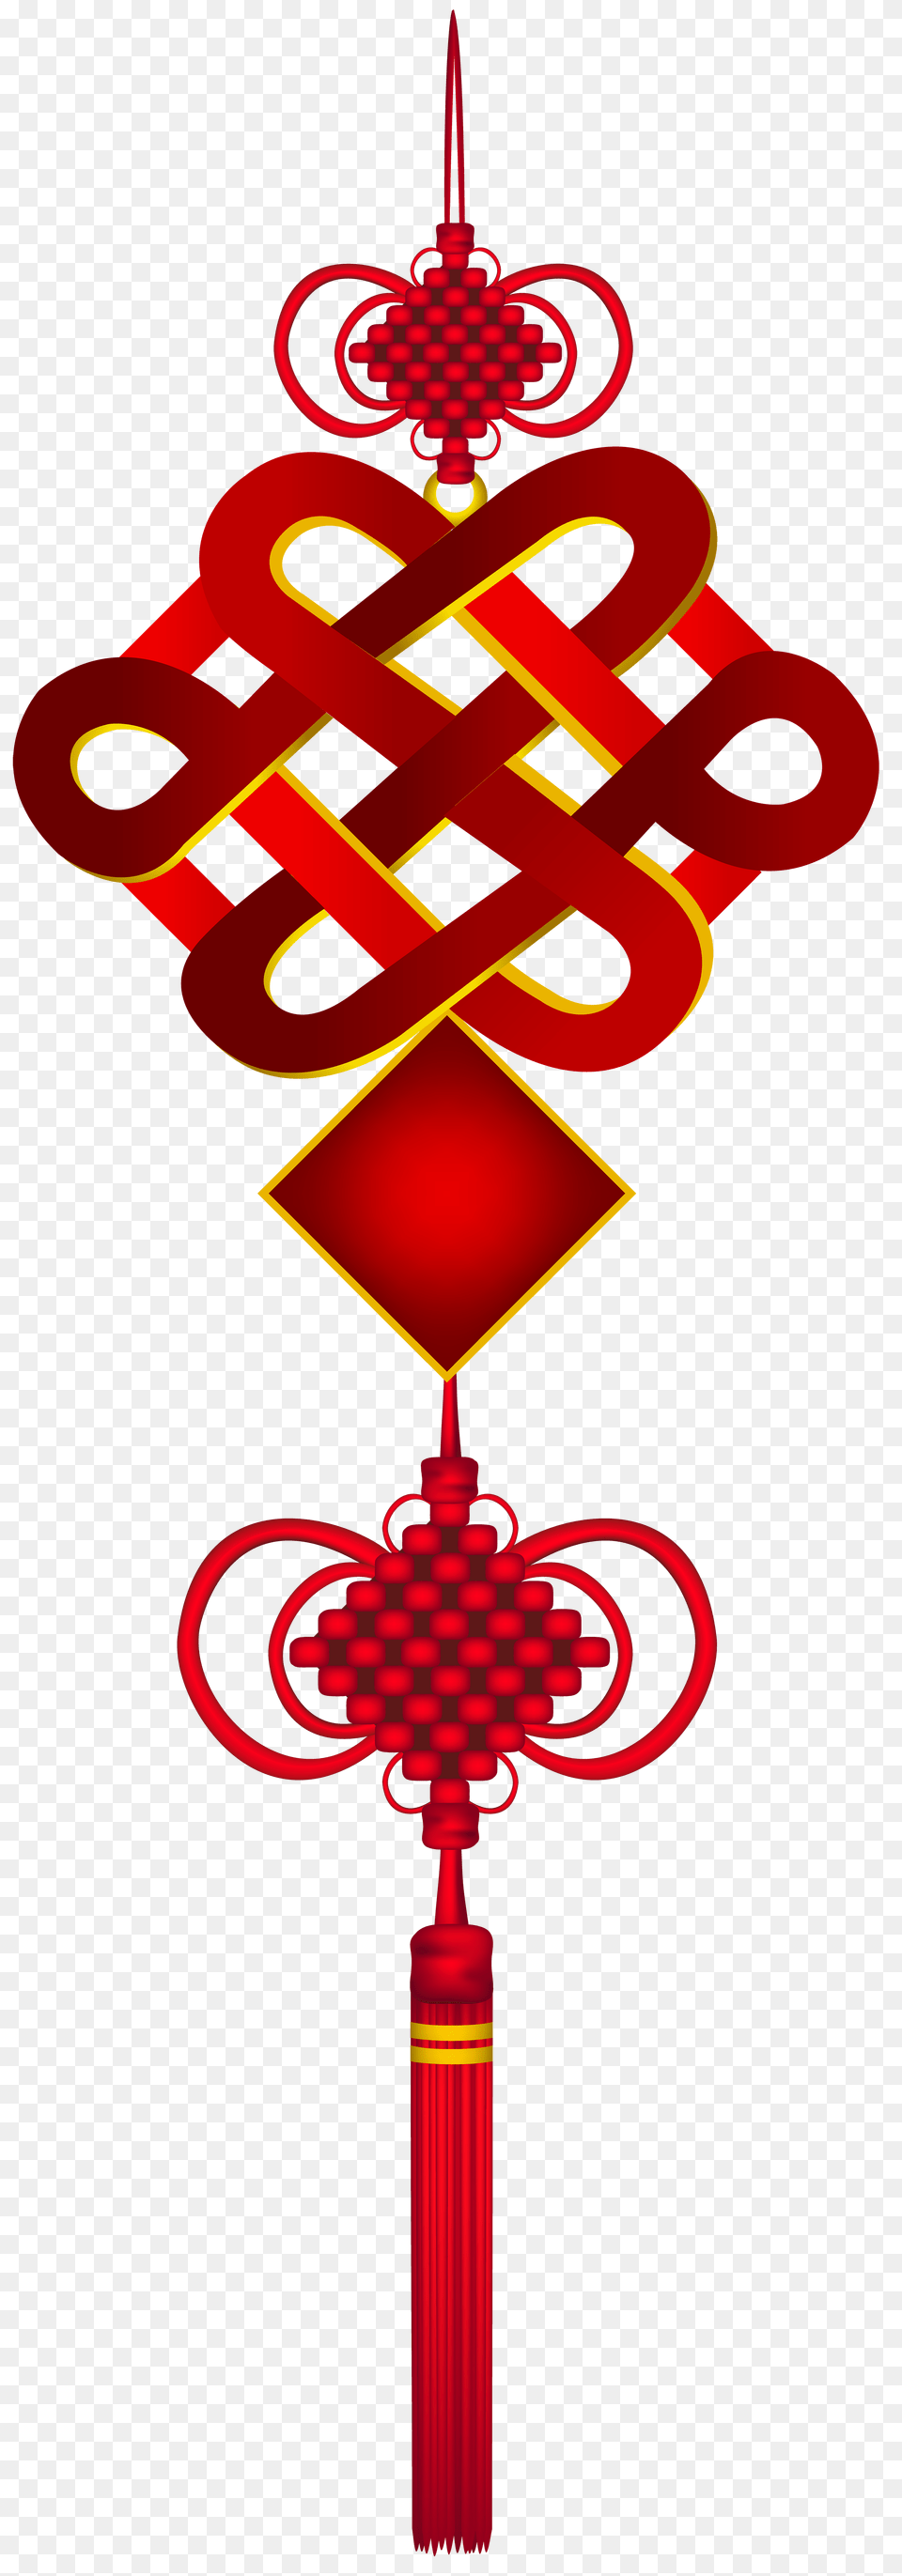 Chinese Hanging Ornament Clip Art, Light, Dynamite, Weapon, Traffic Light Png Image